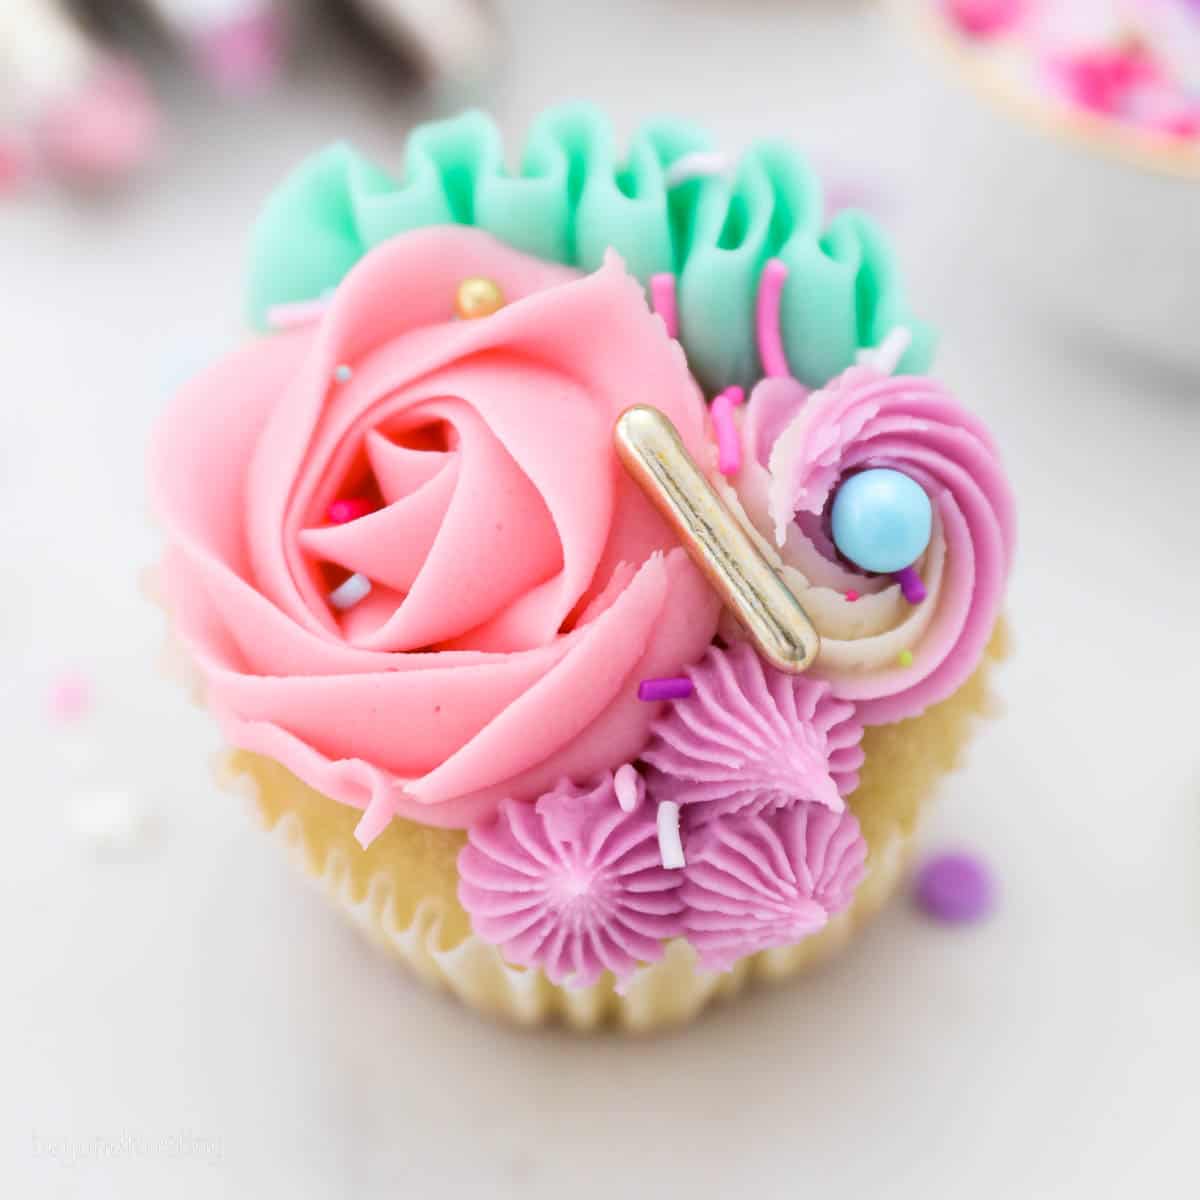 Overhead view of a unicorn cupcake decorated with pink, teal, and purple frosting roses and swirls.